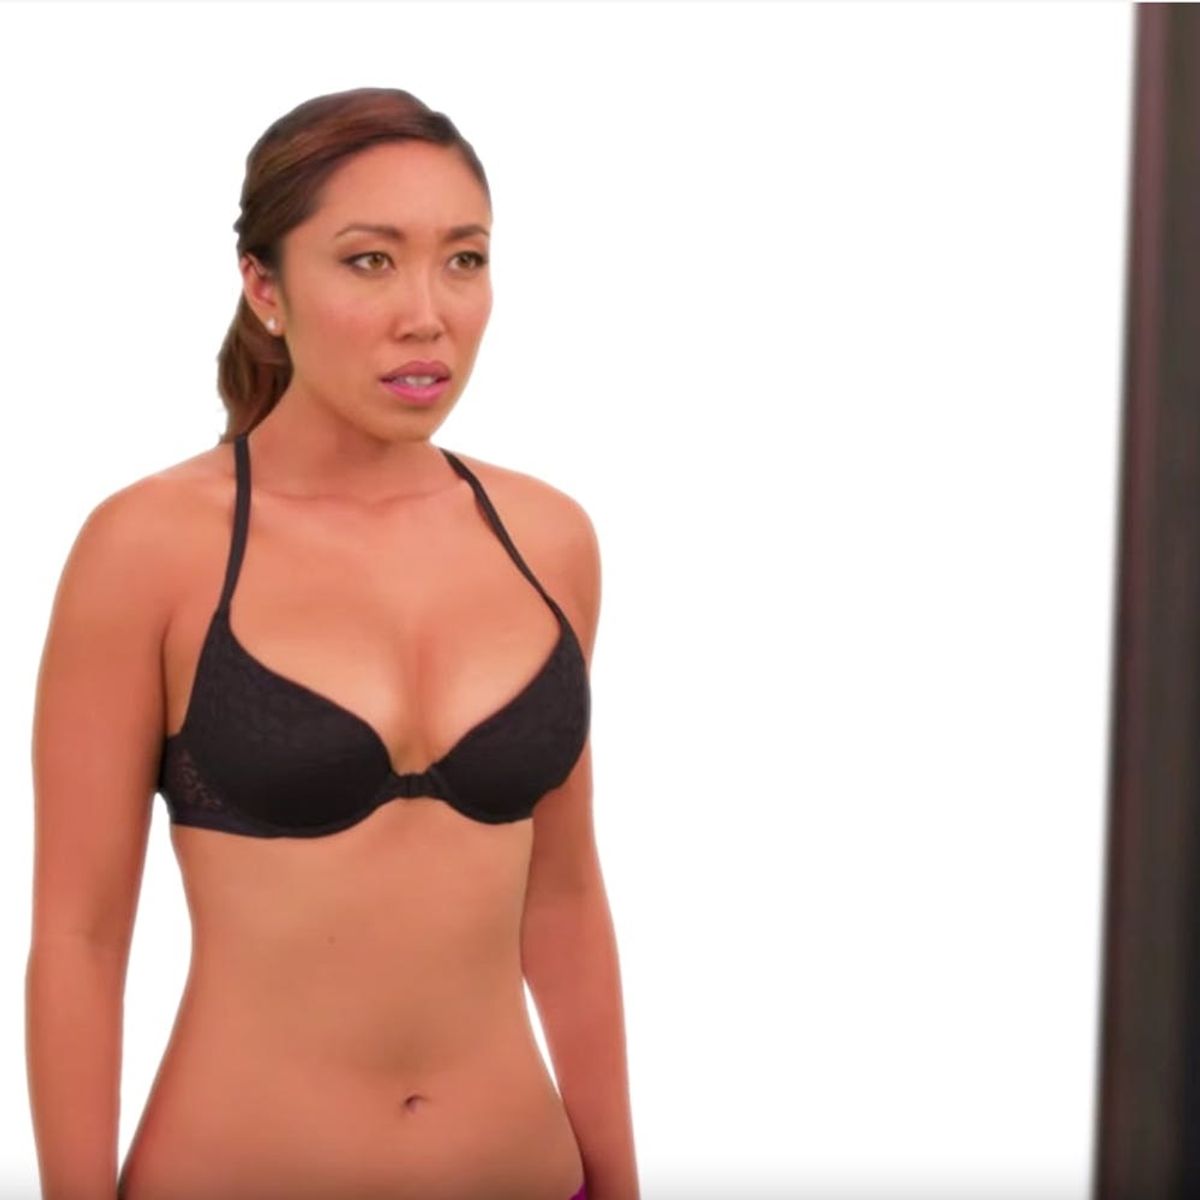 This Must-Watch Video Will Change What You Think Is the “Perfect Body”